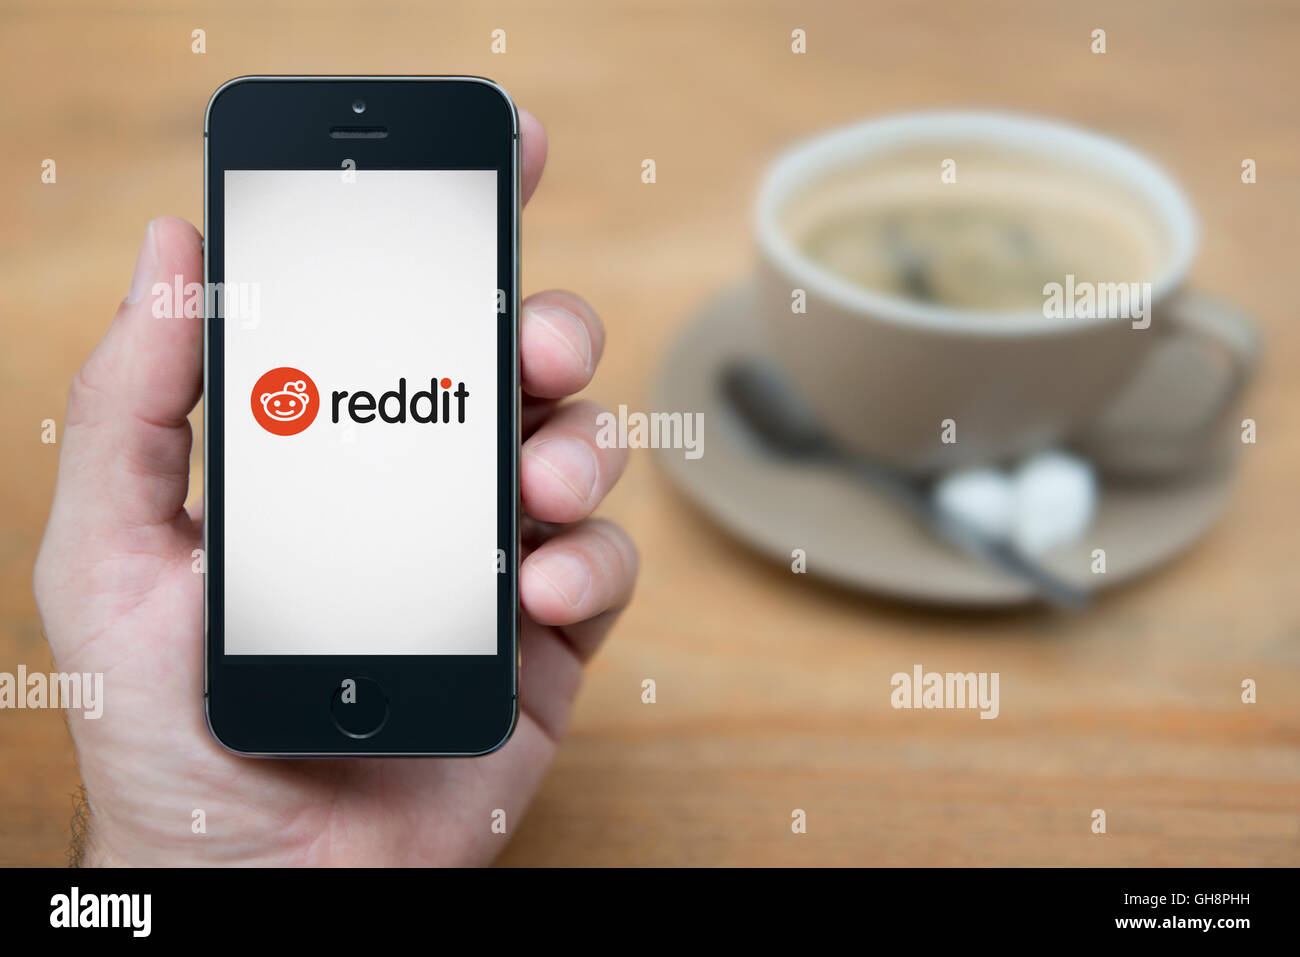 A man looks at his iPhone which displays the Reddit logo, while sat with a cup of coffee (Editorial use only). Stock Photo